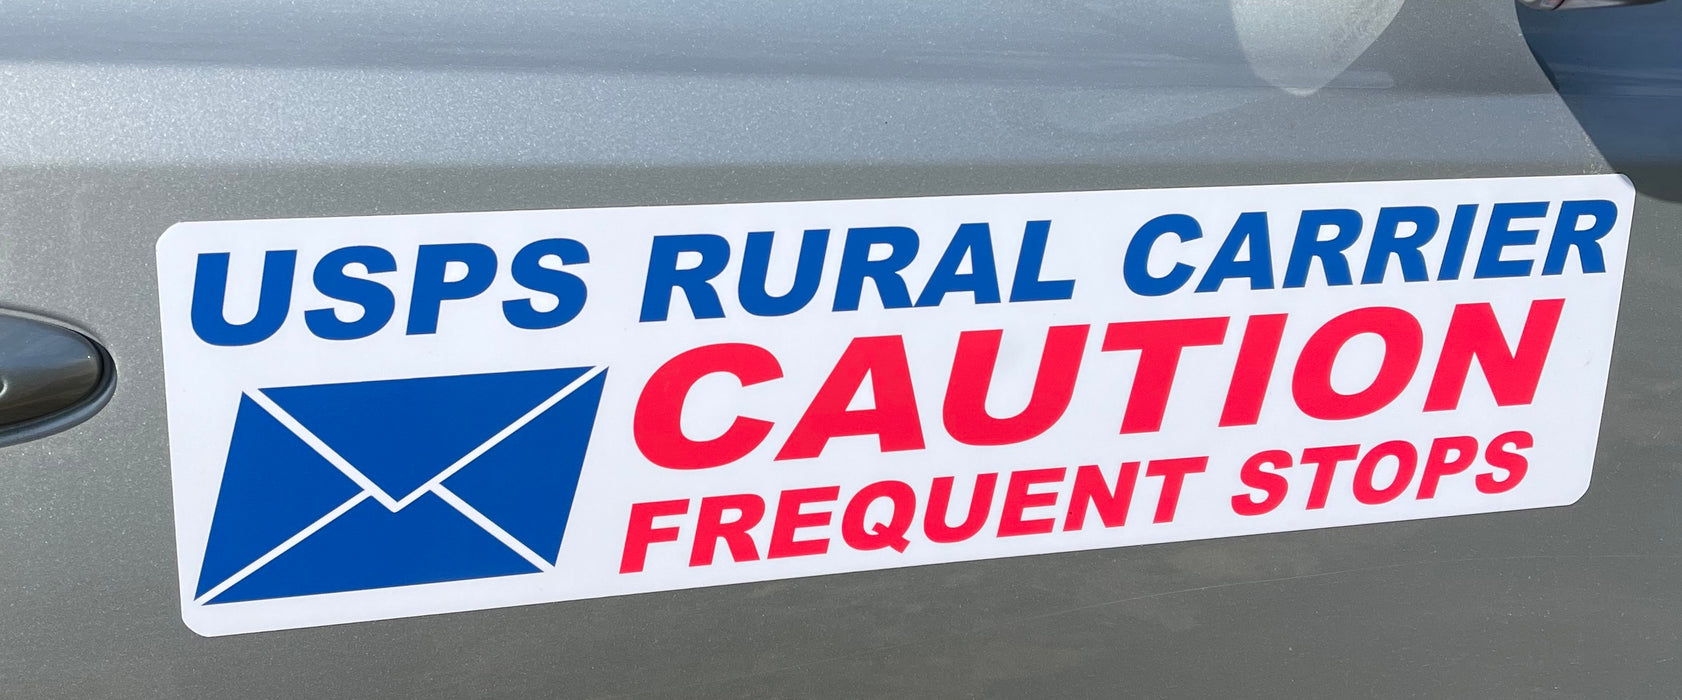 Rural Carrier Magnetic Signs Large 3 Pack Combo